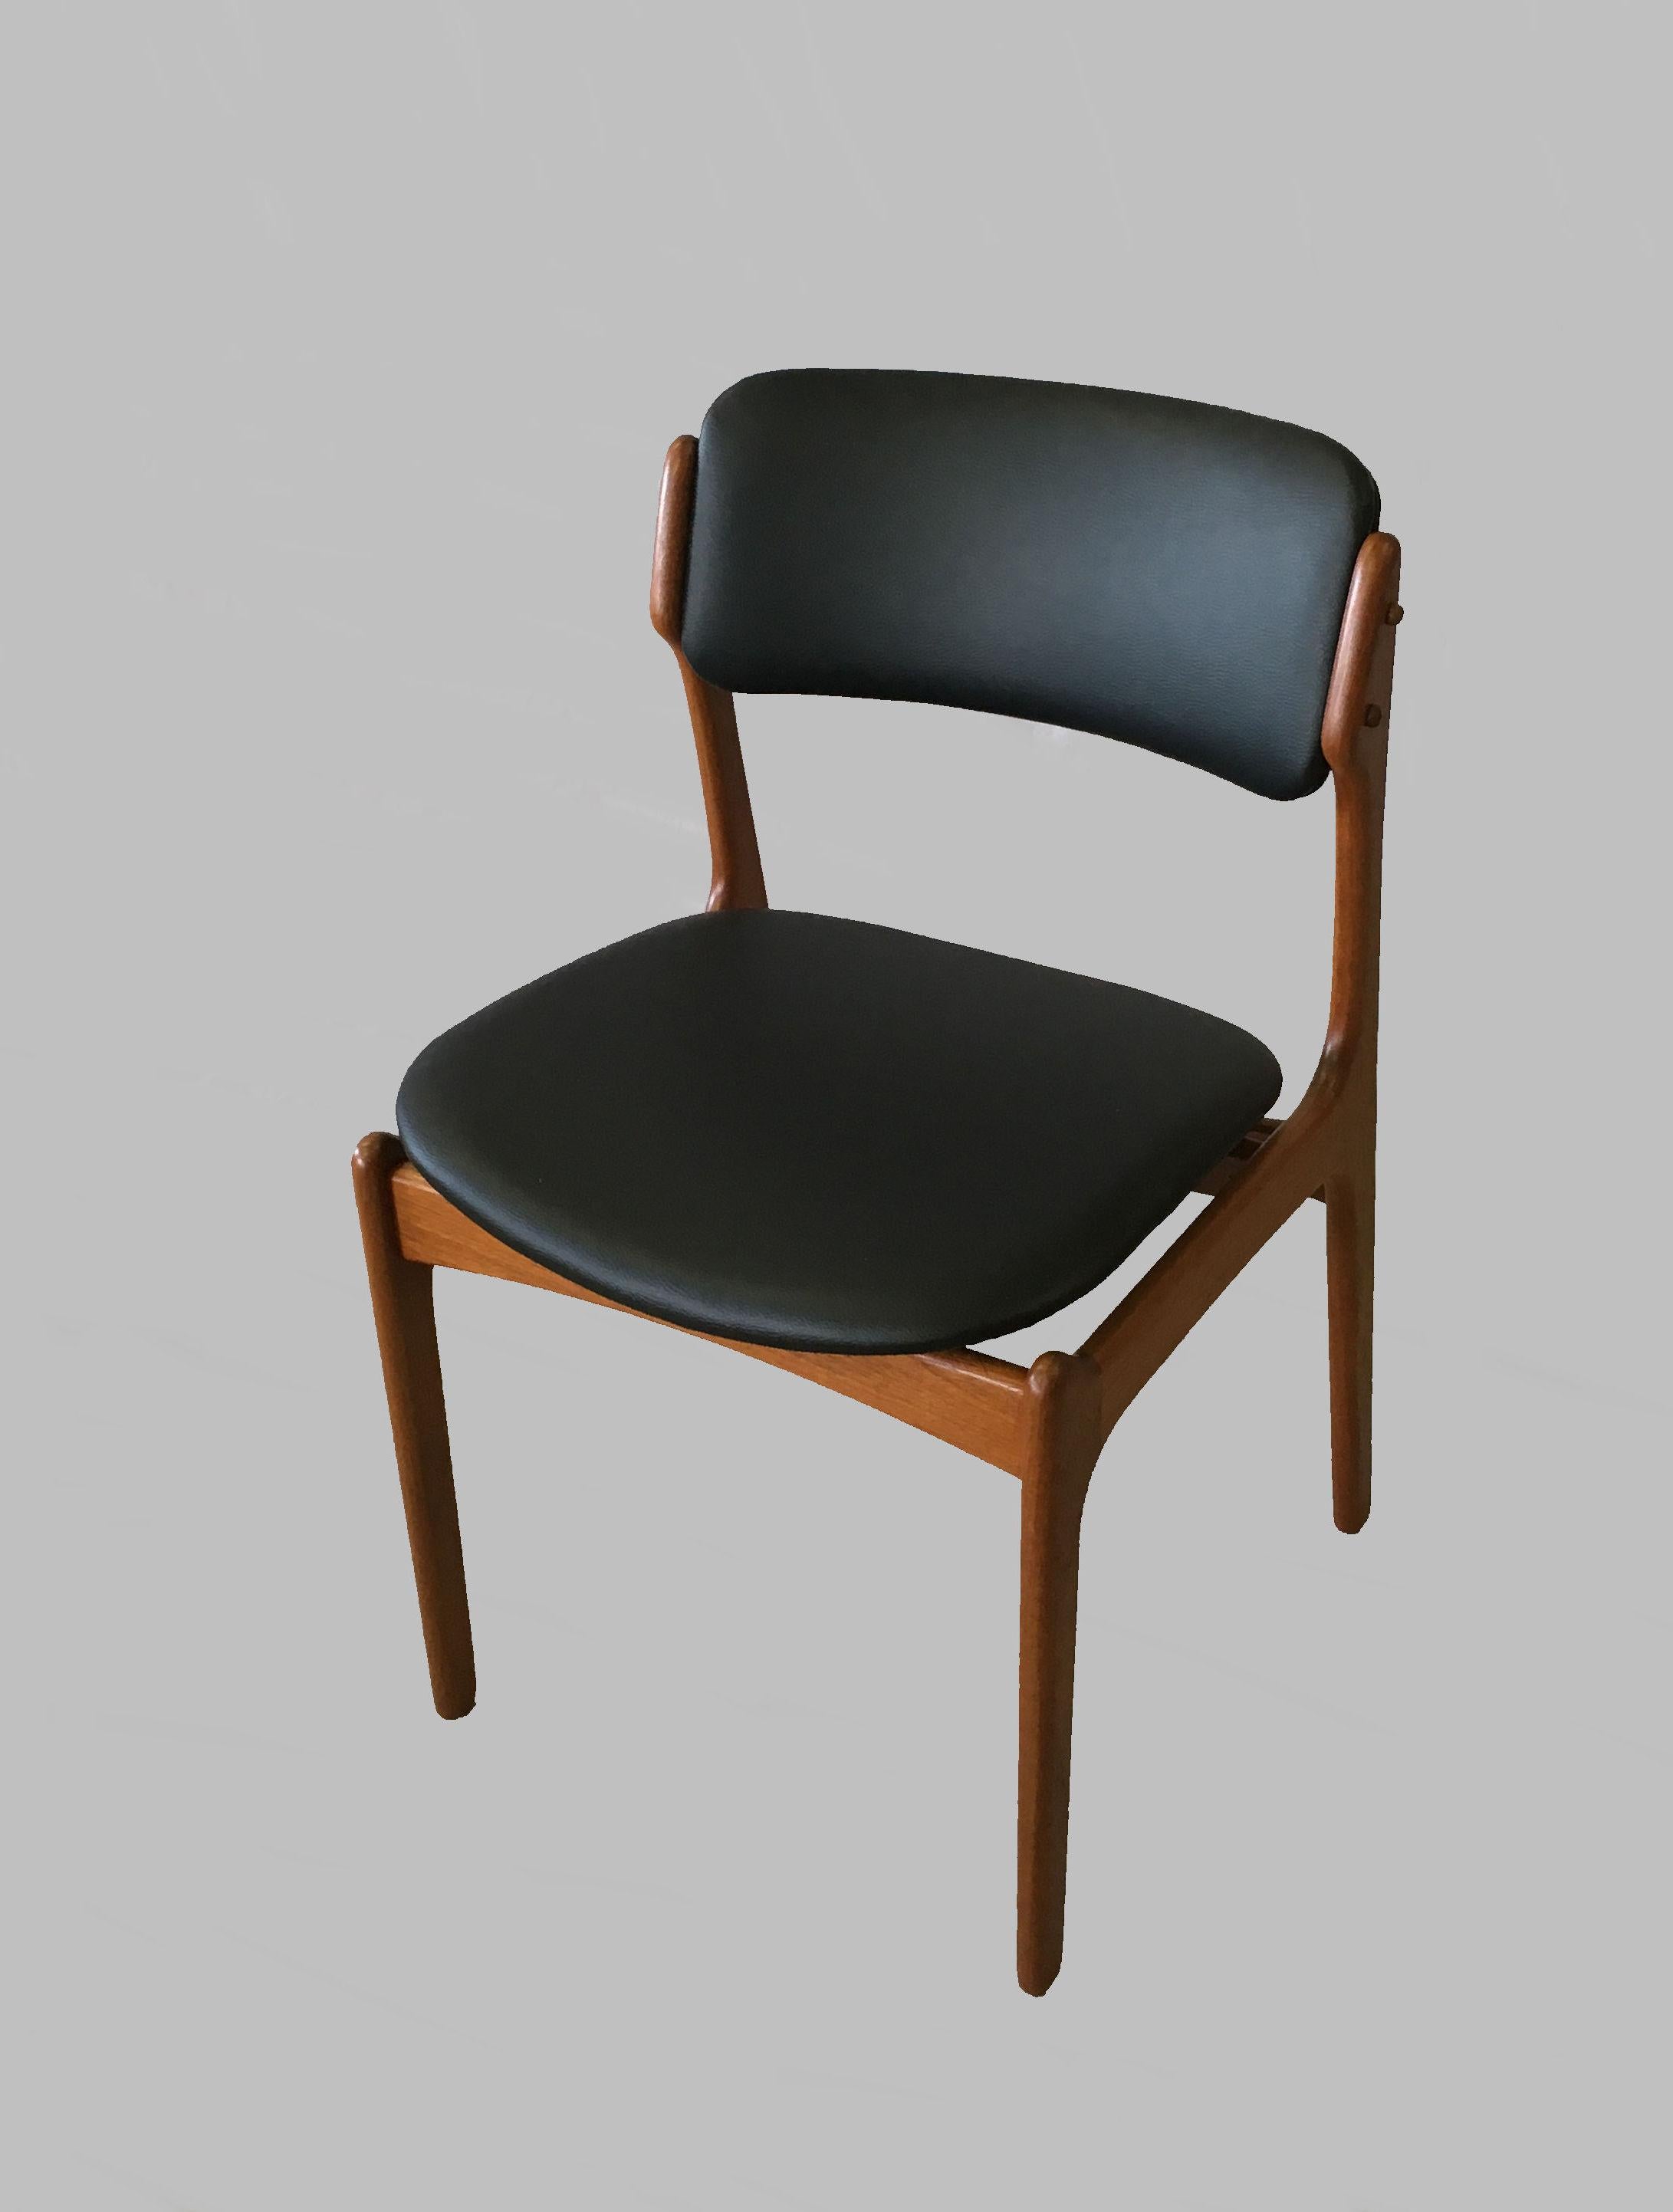 Scandinavian Modern Six Fully Restored Erik Buch Teak Dining Chairs, Reupholstered in Black Leather For Sale